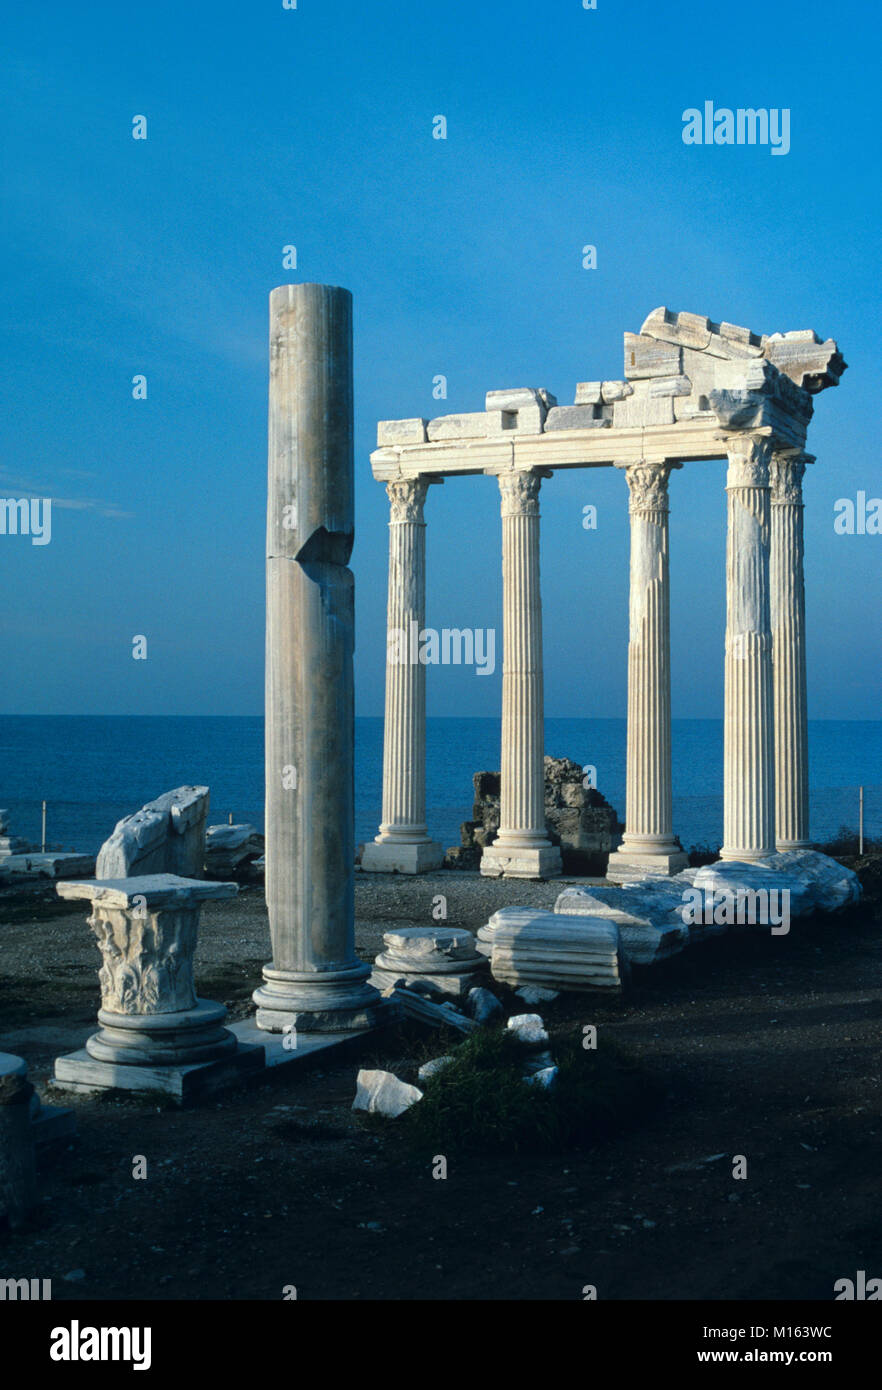 Ancient Greek Temple of Apollo (c2nd) in the Remains or Ruins of the Antique Greek City of Side, Antalya, Turkey Stock Photo